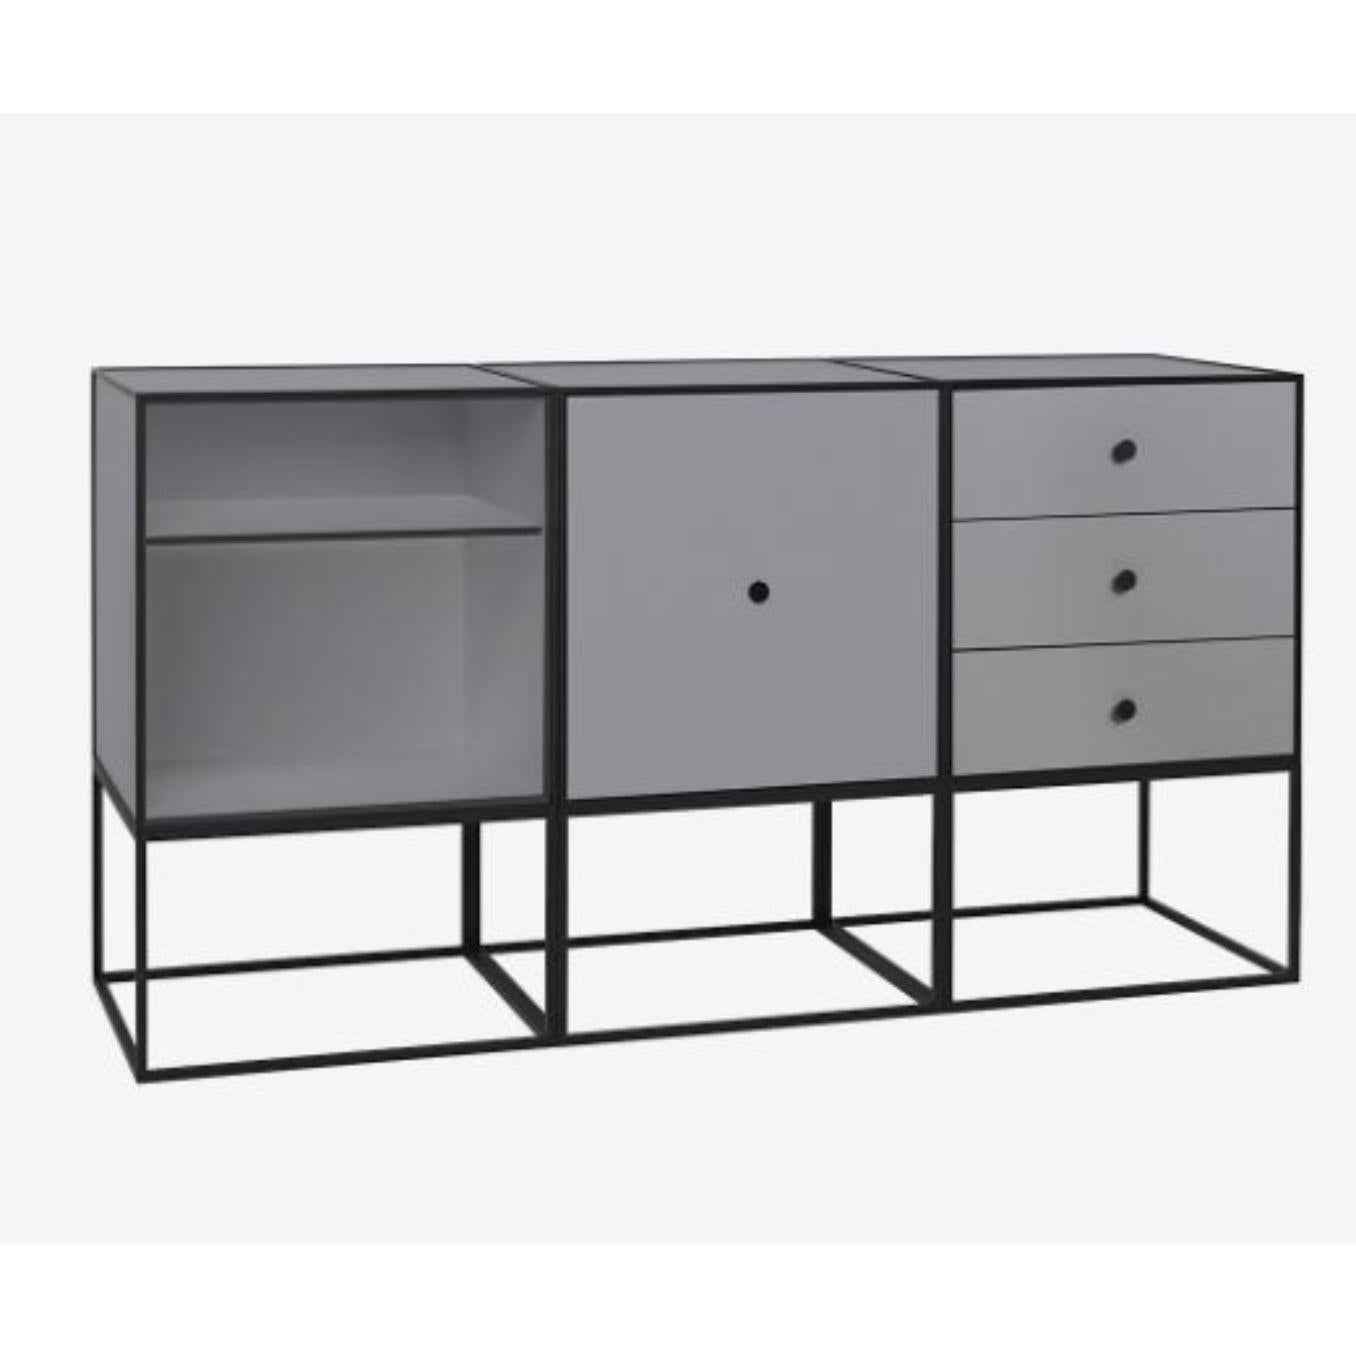 49 dark grey frame sideboard Trio by Lassen
Dimensions: D 147 x W 42 x H 77 cm 
Materials: Finér, Melamin, Melamine, Metal, Veneer
Also available in different colors and dimensions. 
Weight: 88 Kg

By Lassen is a Danish design brand focused on